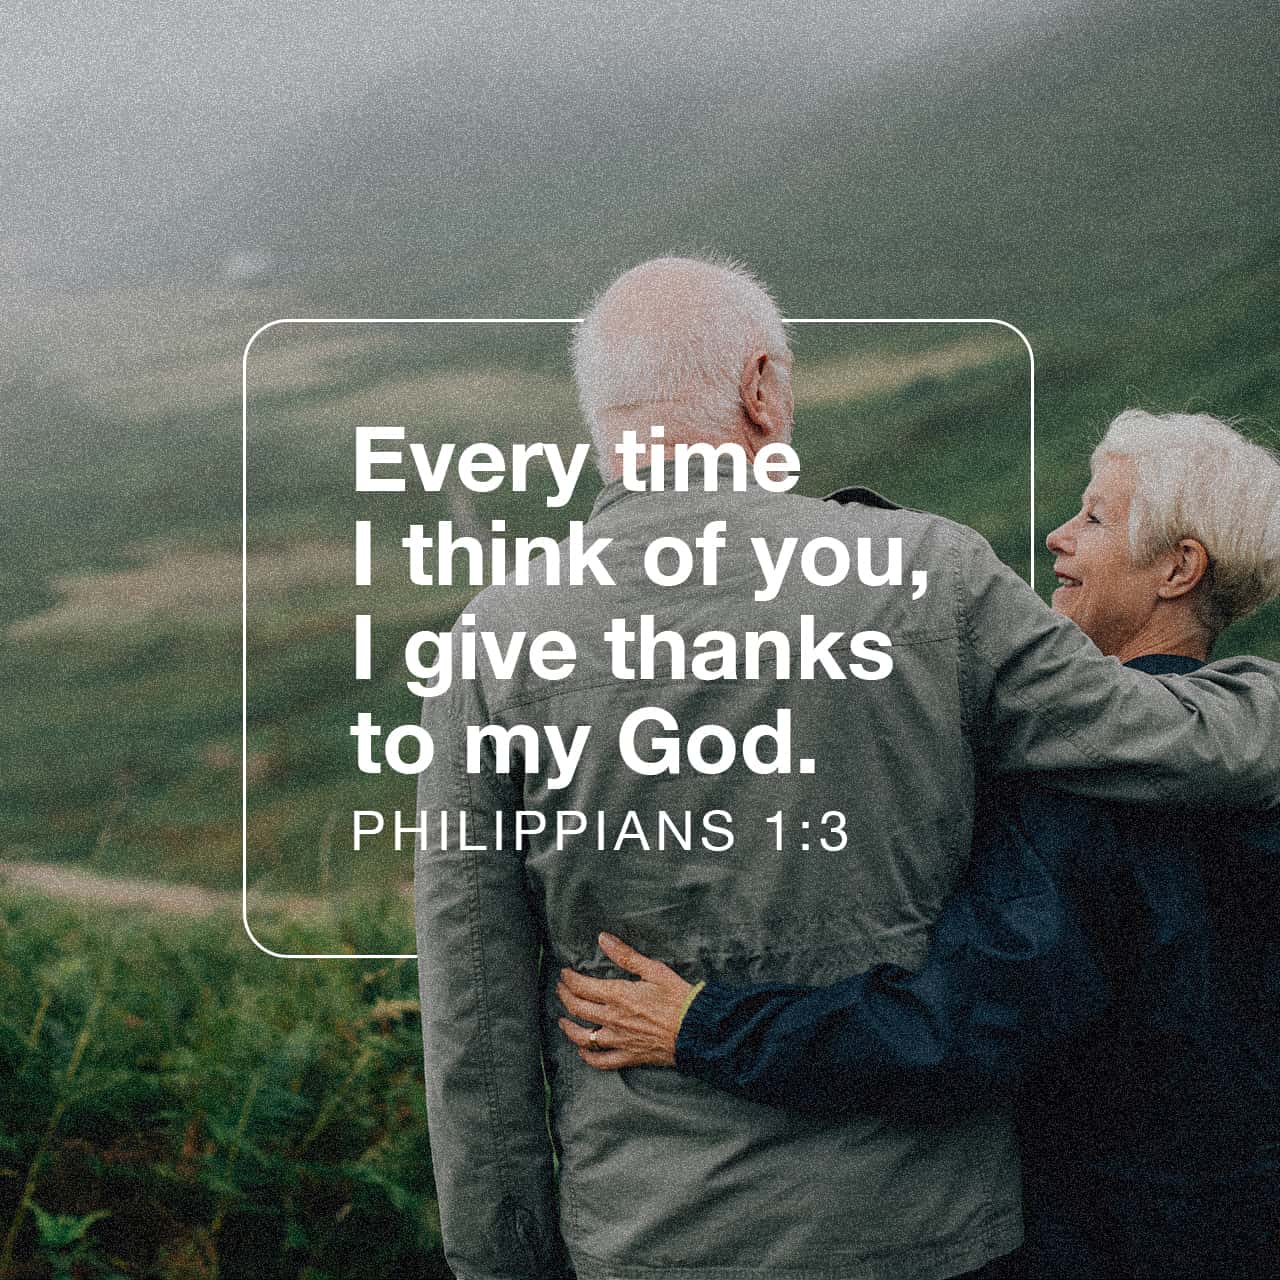 Every time I think of you, I give thanks to my God - Philippians 1:3 - Verse Image